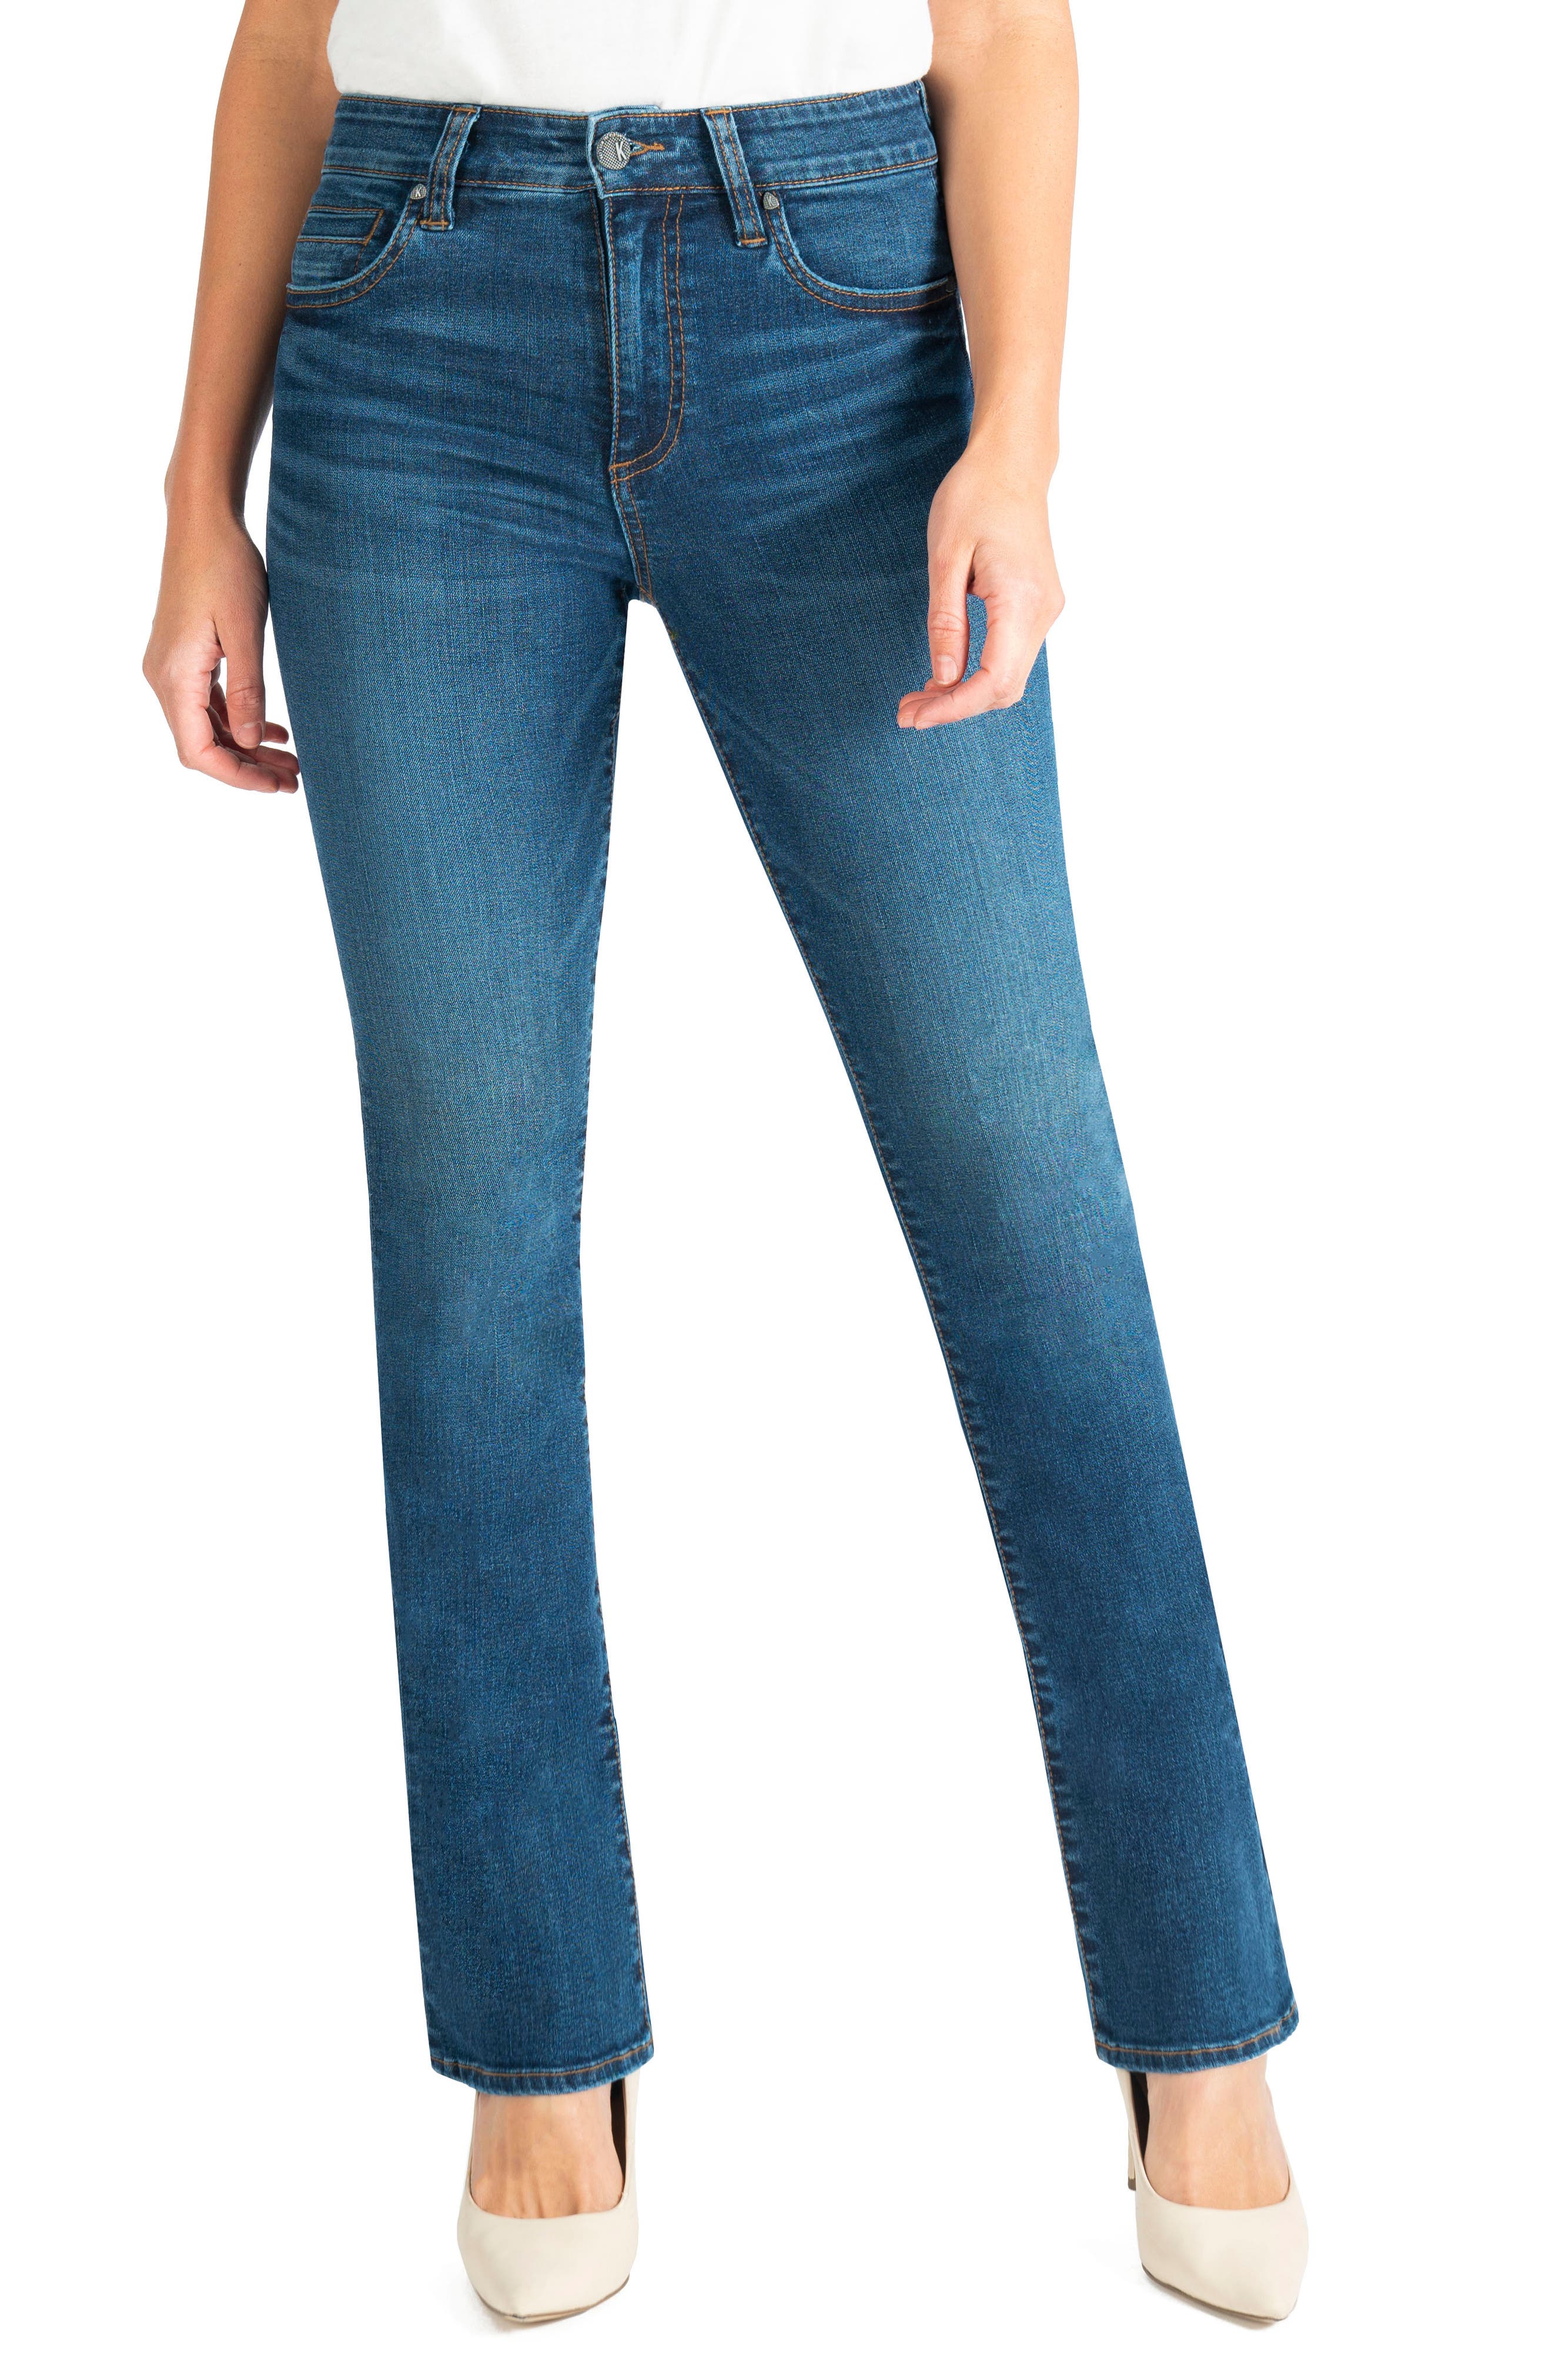 KUT from the Kloth | Natalie High Waist Bootcut Jeans | Nordstrom Rack